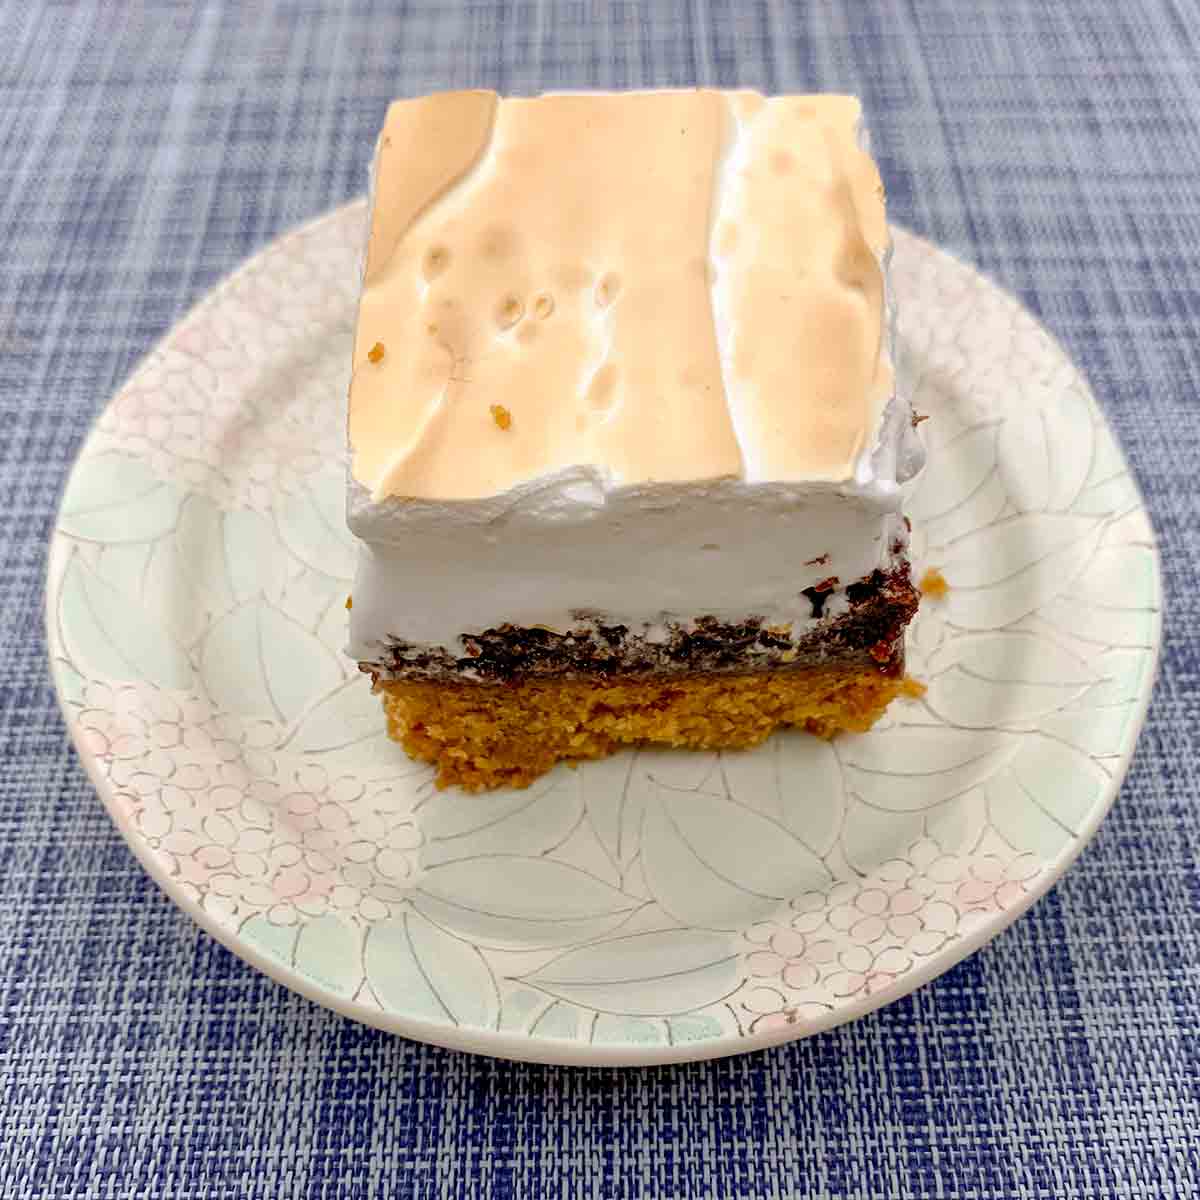 A piece of Cheryl Day's s'mores bars ona patterned plate on a blue and white placemat